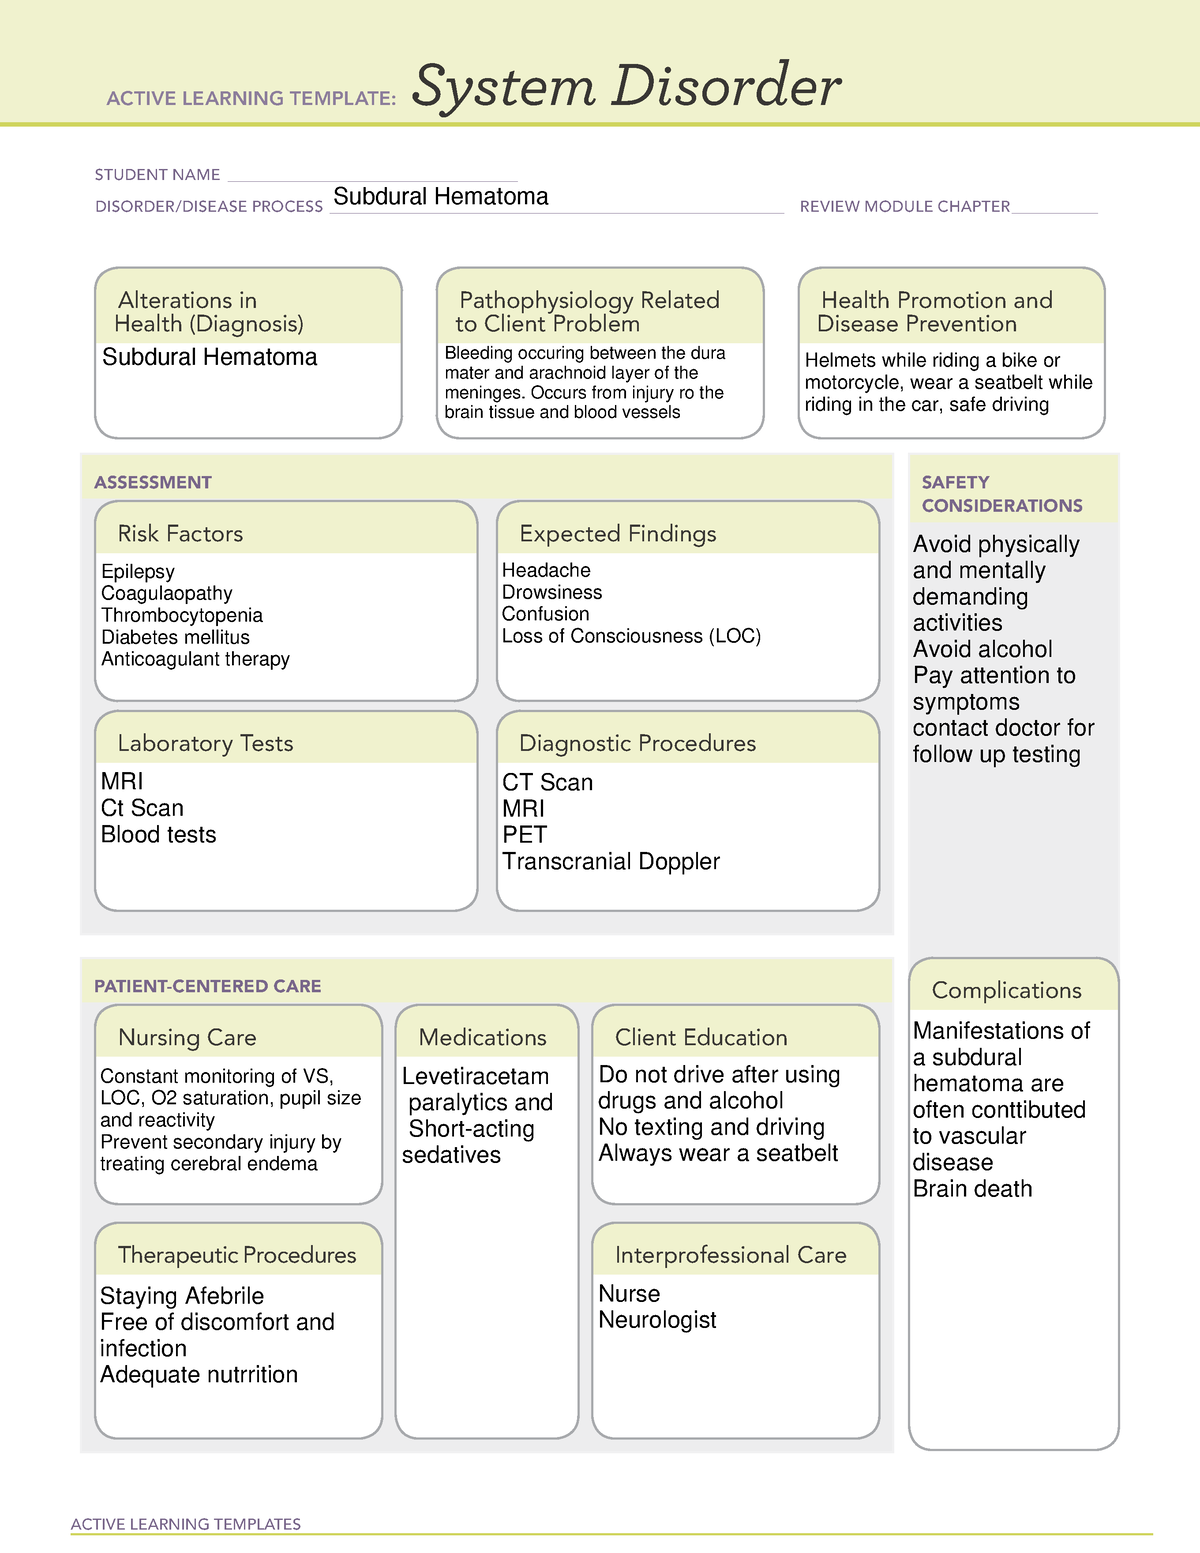 Subdural Hematoma system disorder template ACTIVE LEARNING TEMPLATES